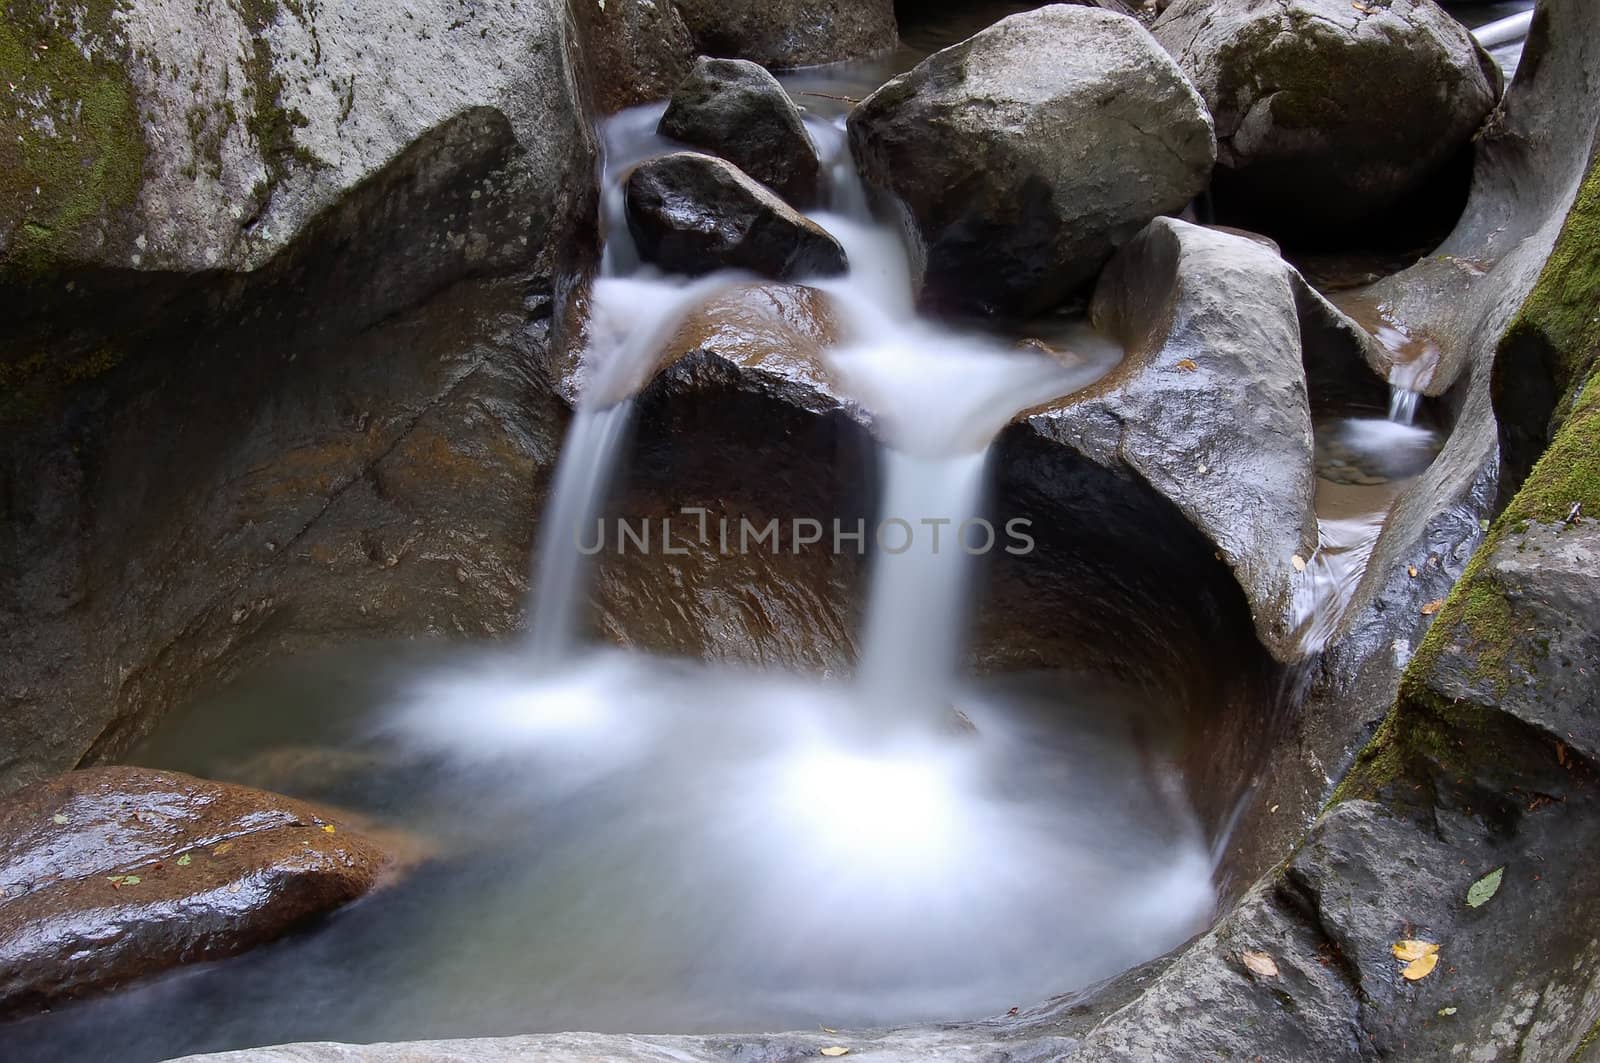 Picture of a small stream with some water falls